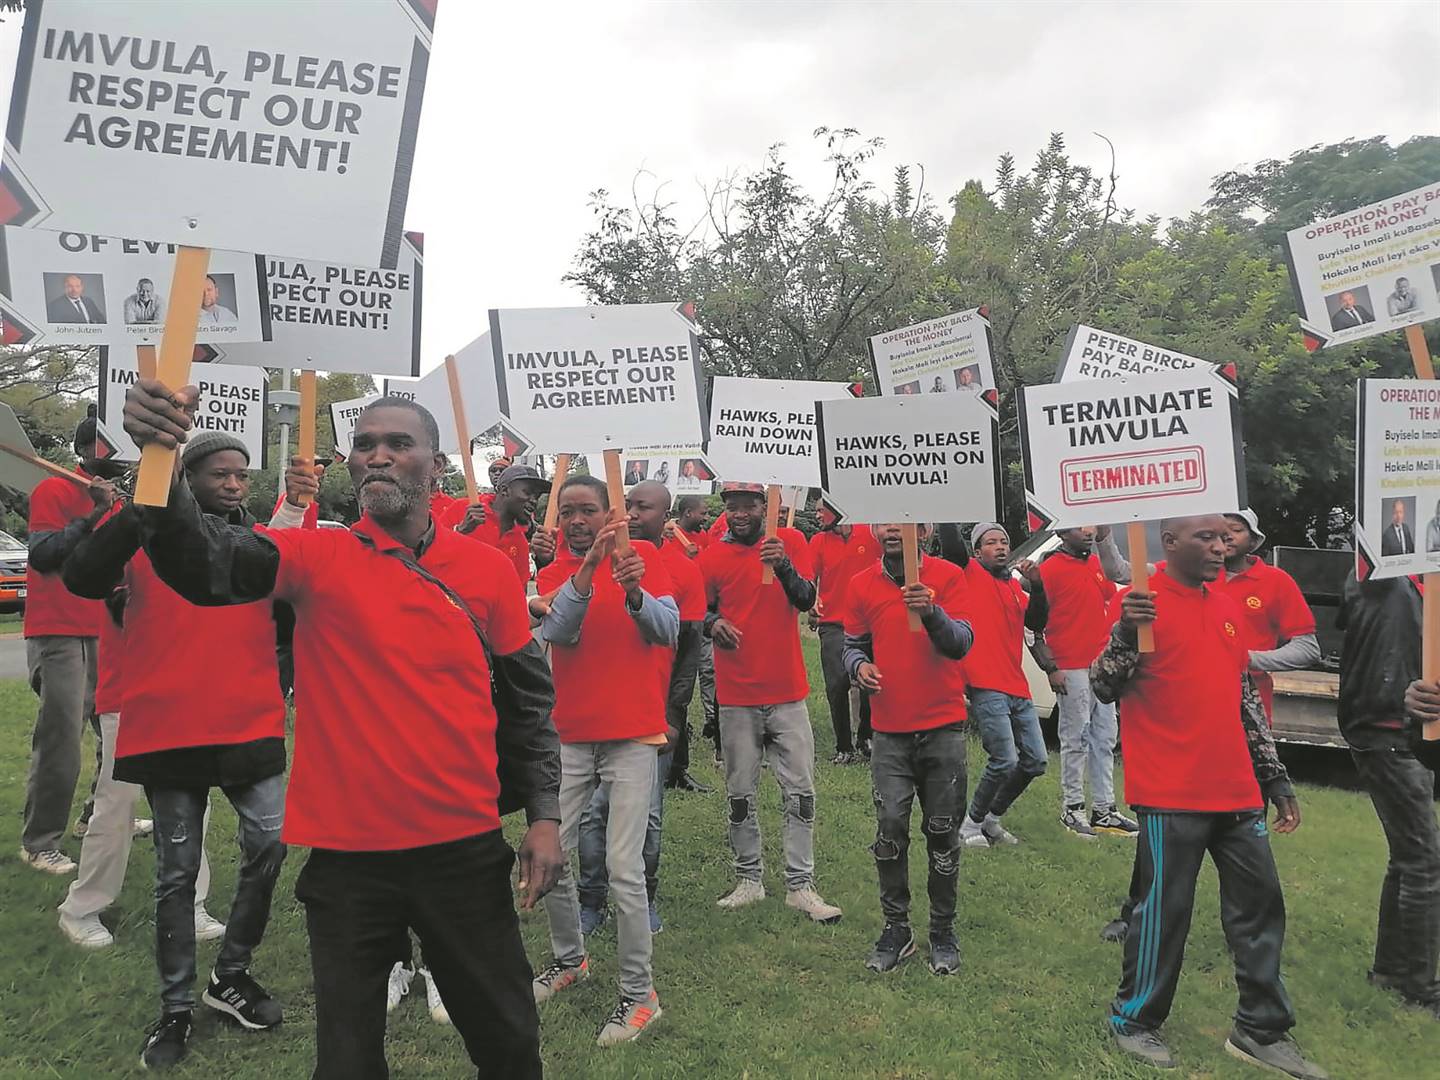 Members of different unions picketing outside the Imvula Groups’ offices in Woodmead. Photo by Kgomotso Medupe